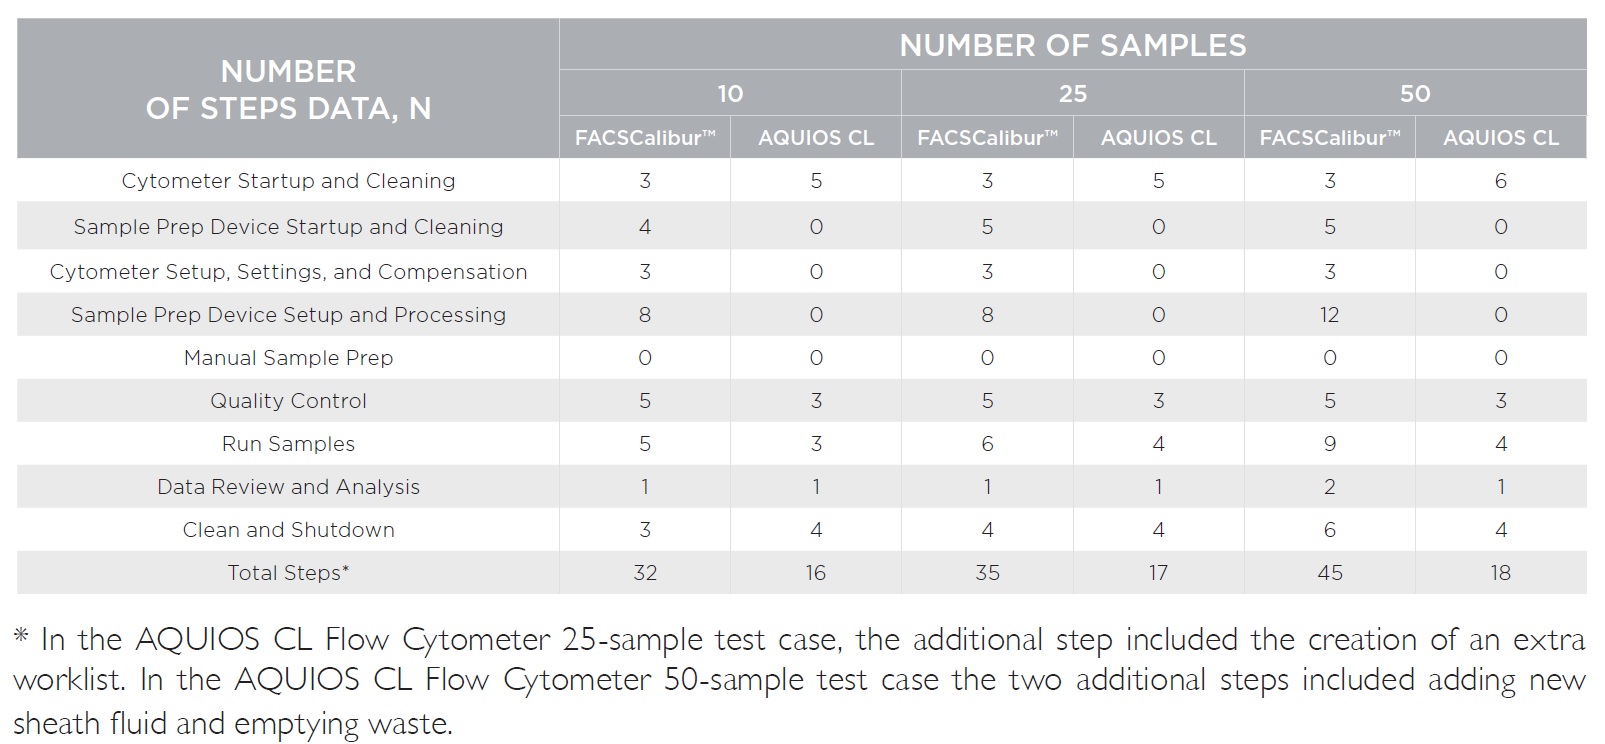 University of Texas medical branch (UTMB) workflow comparison study with the aquios cl flow cytometer Figure 5